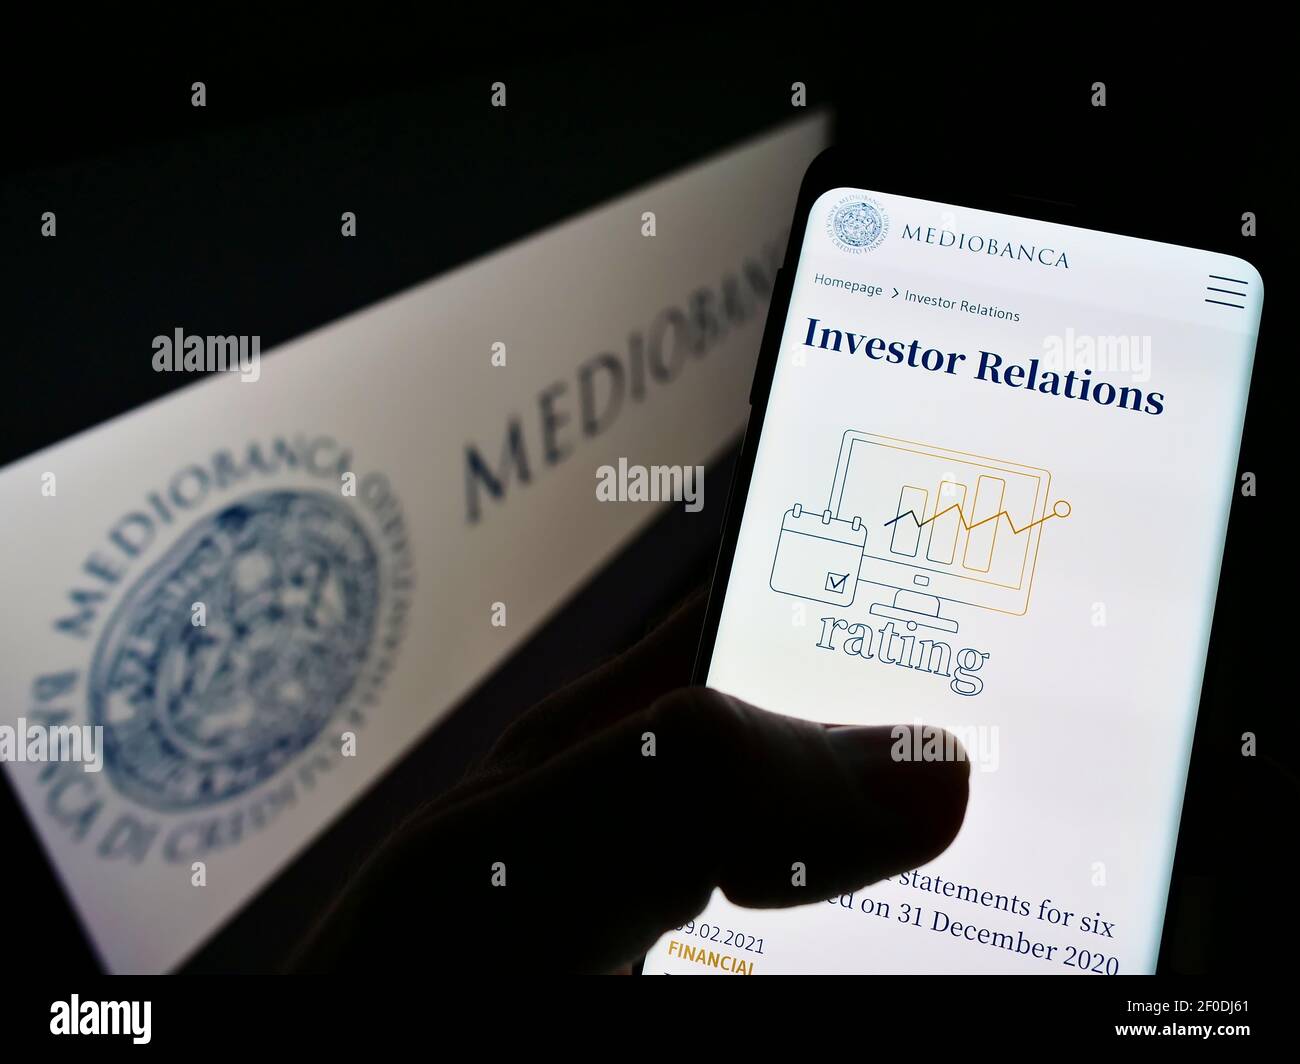 Person holding mobile phone with website of Italian investment bank Mediobanca SpA. on screen in front of logo. Focus on center of phone display. Stock Photo